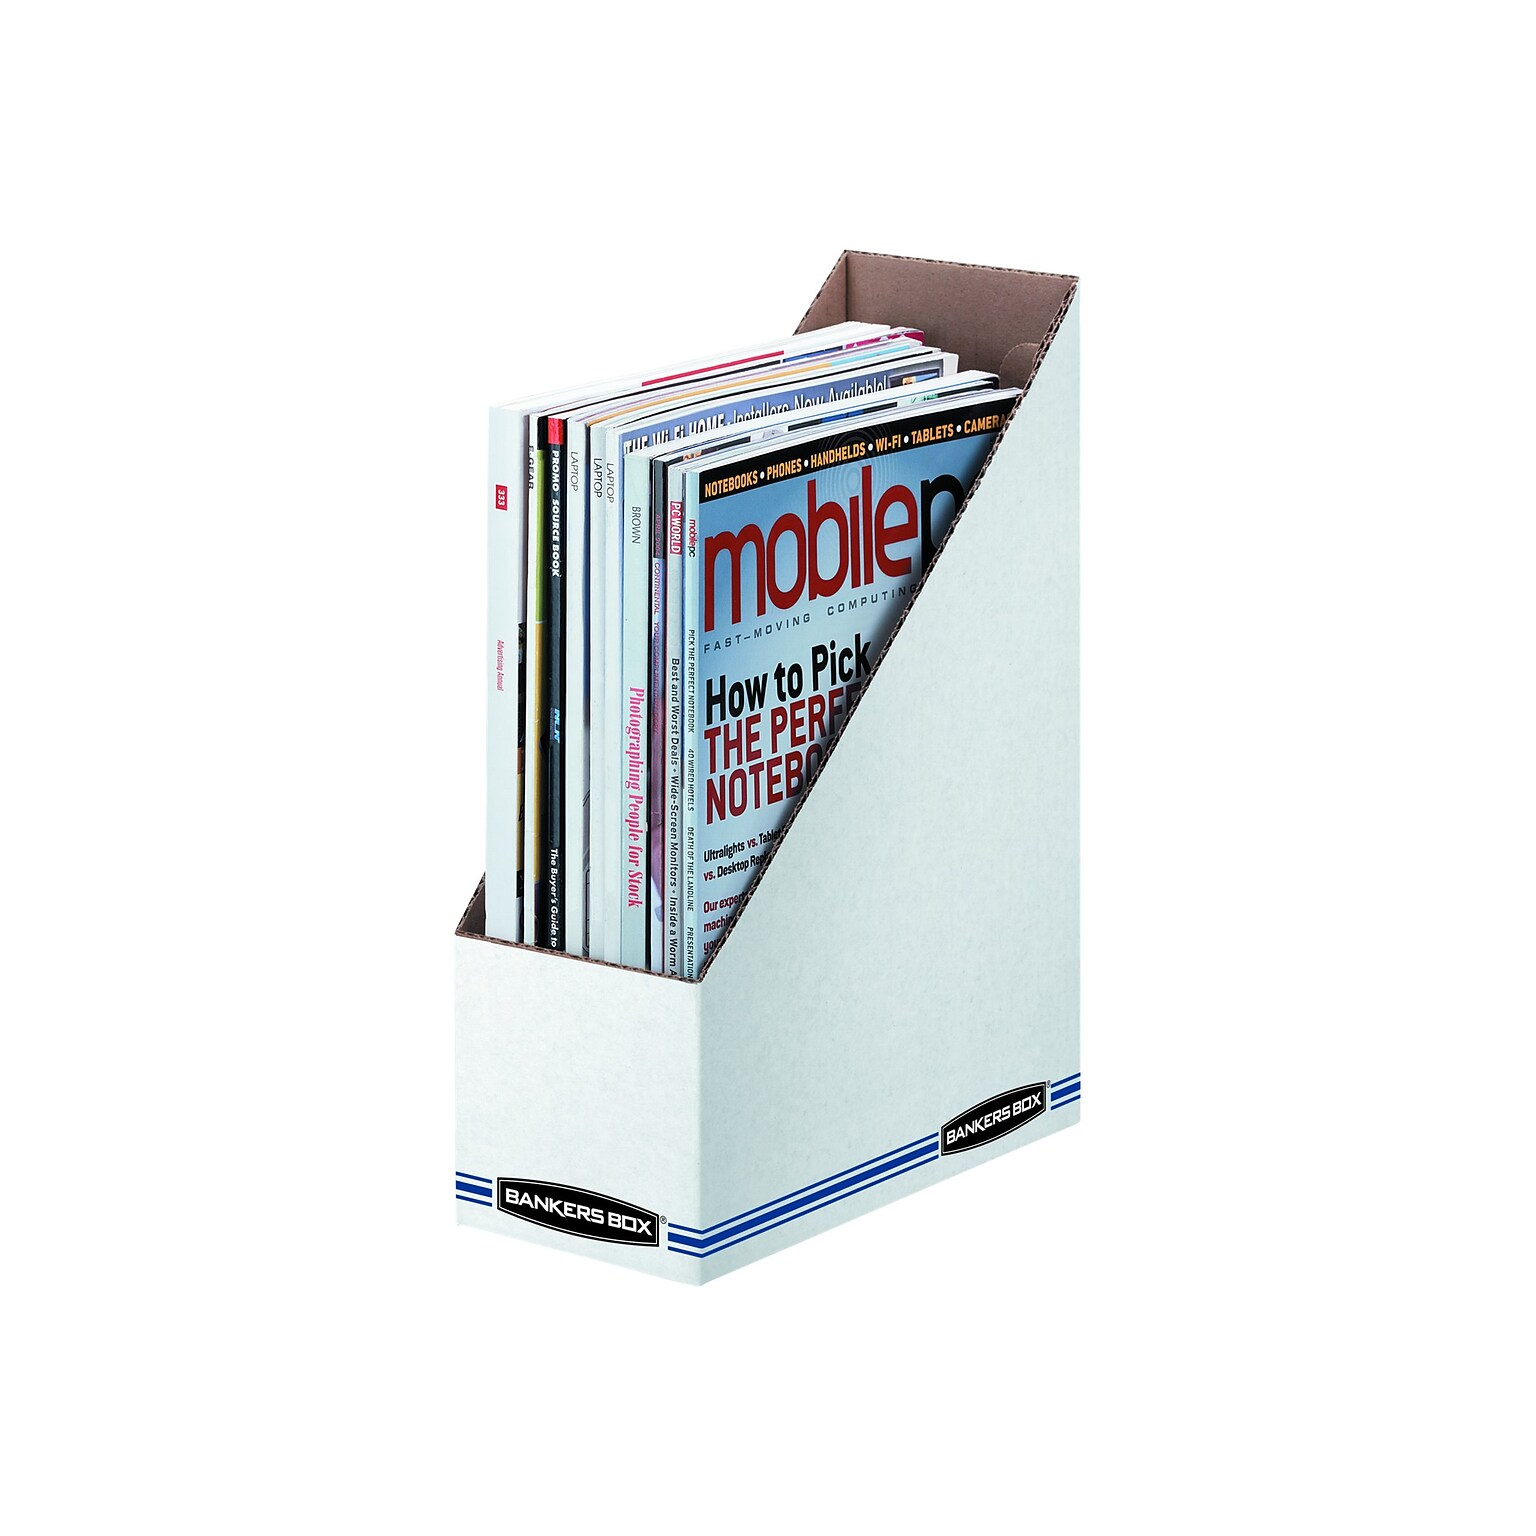 Bankers Box Stor/File Magazine File, Letter Size, White/Blue (00723)